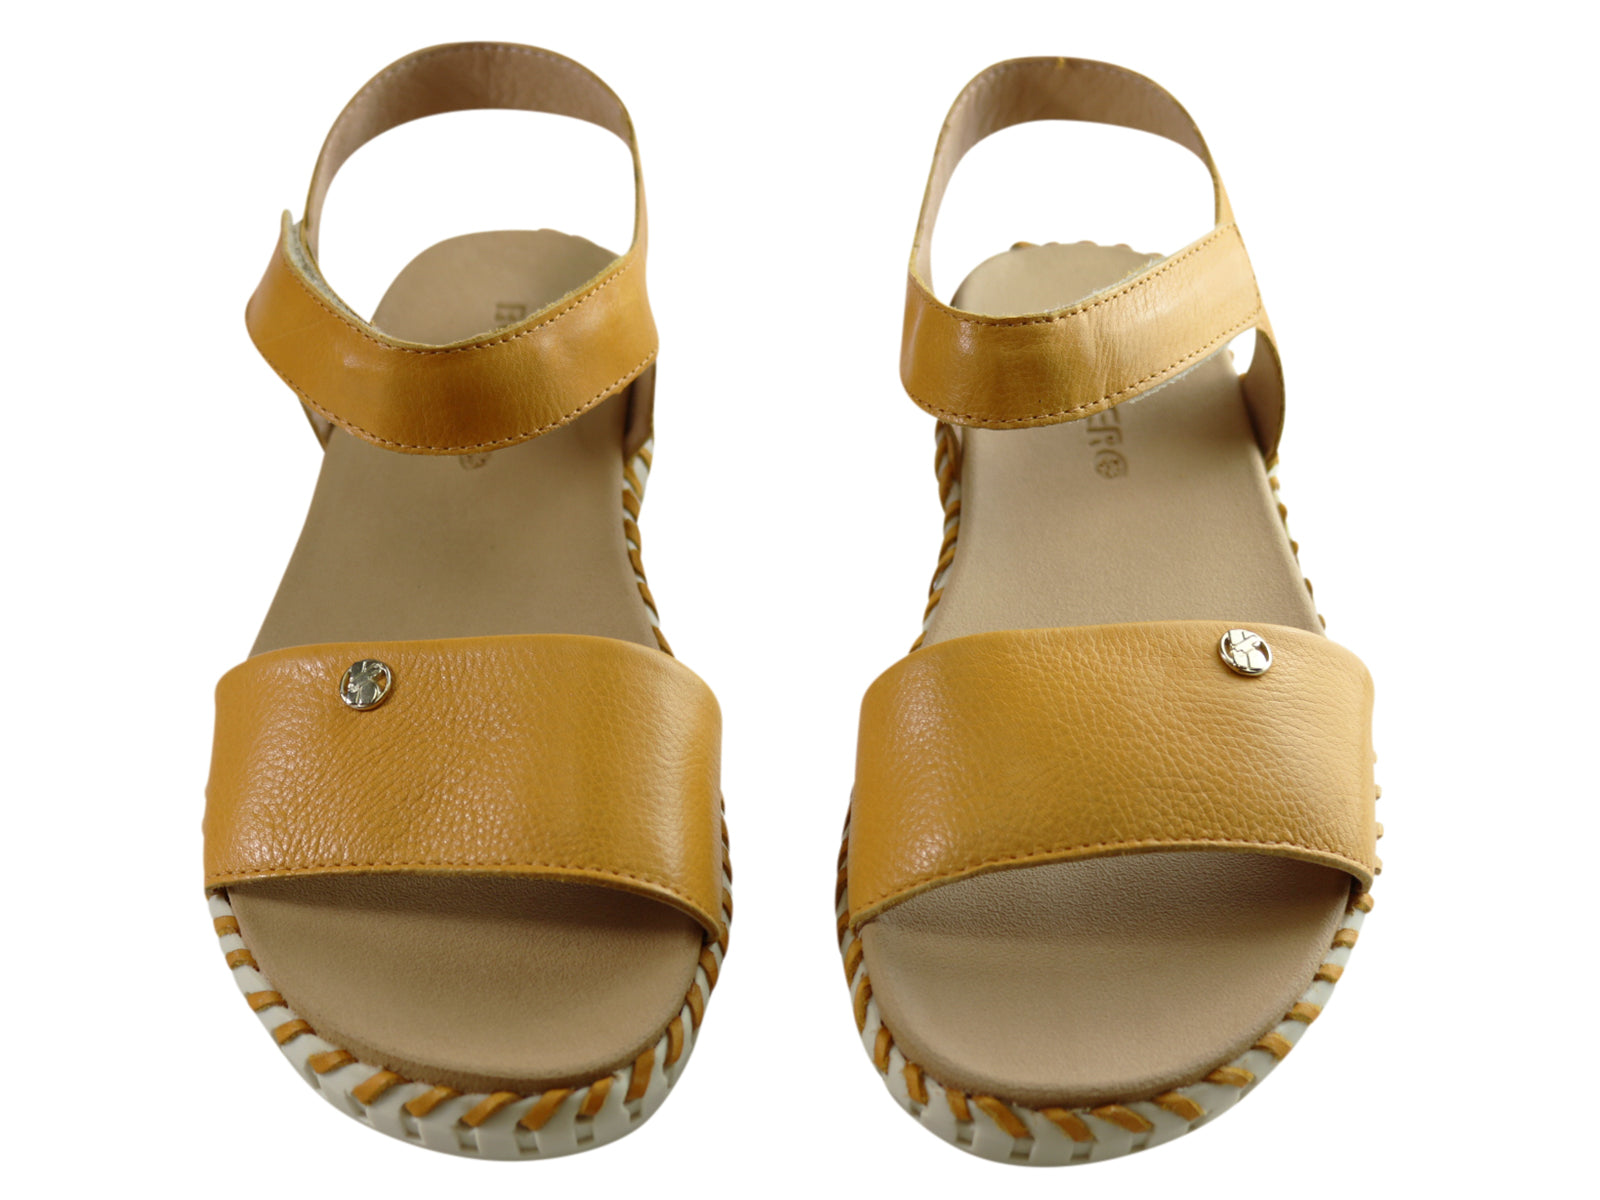 Bottero Lexie Womens Comfortable Leather Sandals Made In Brazil